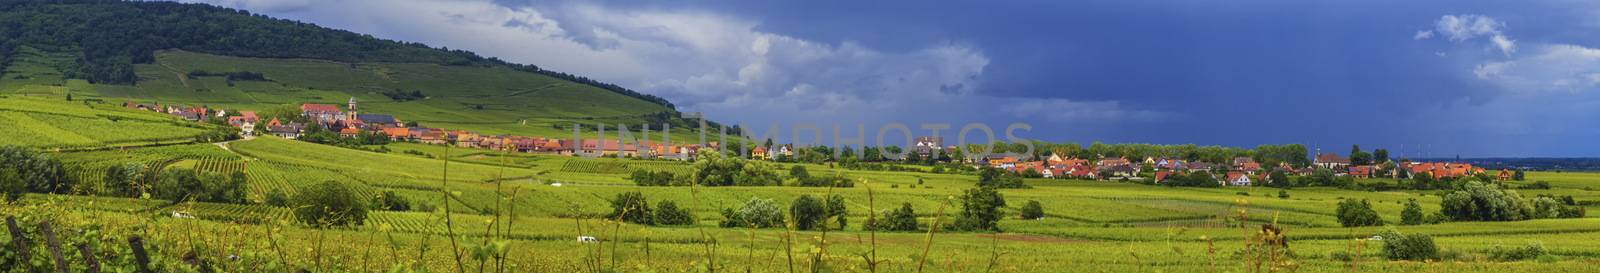 Alsace landscape with villages and vineyards by cloudy day